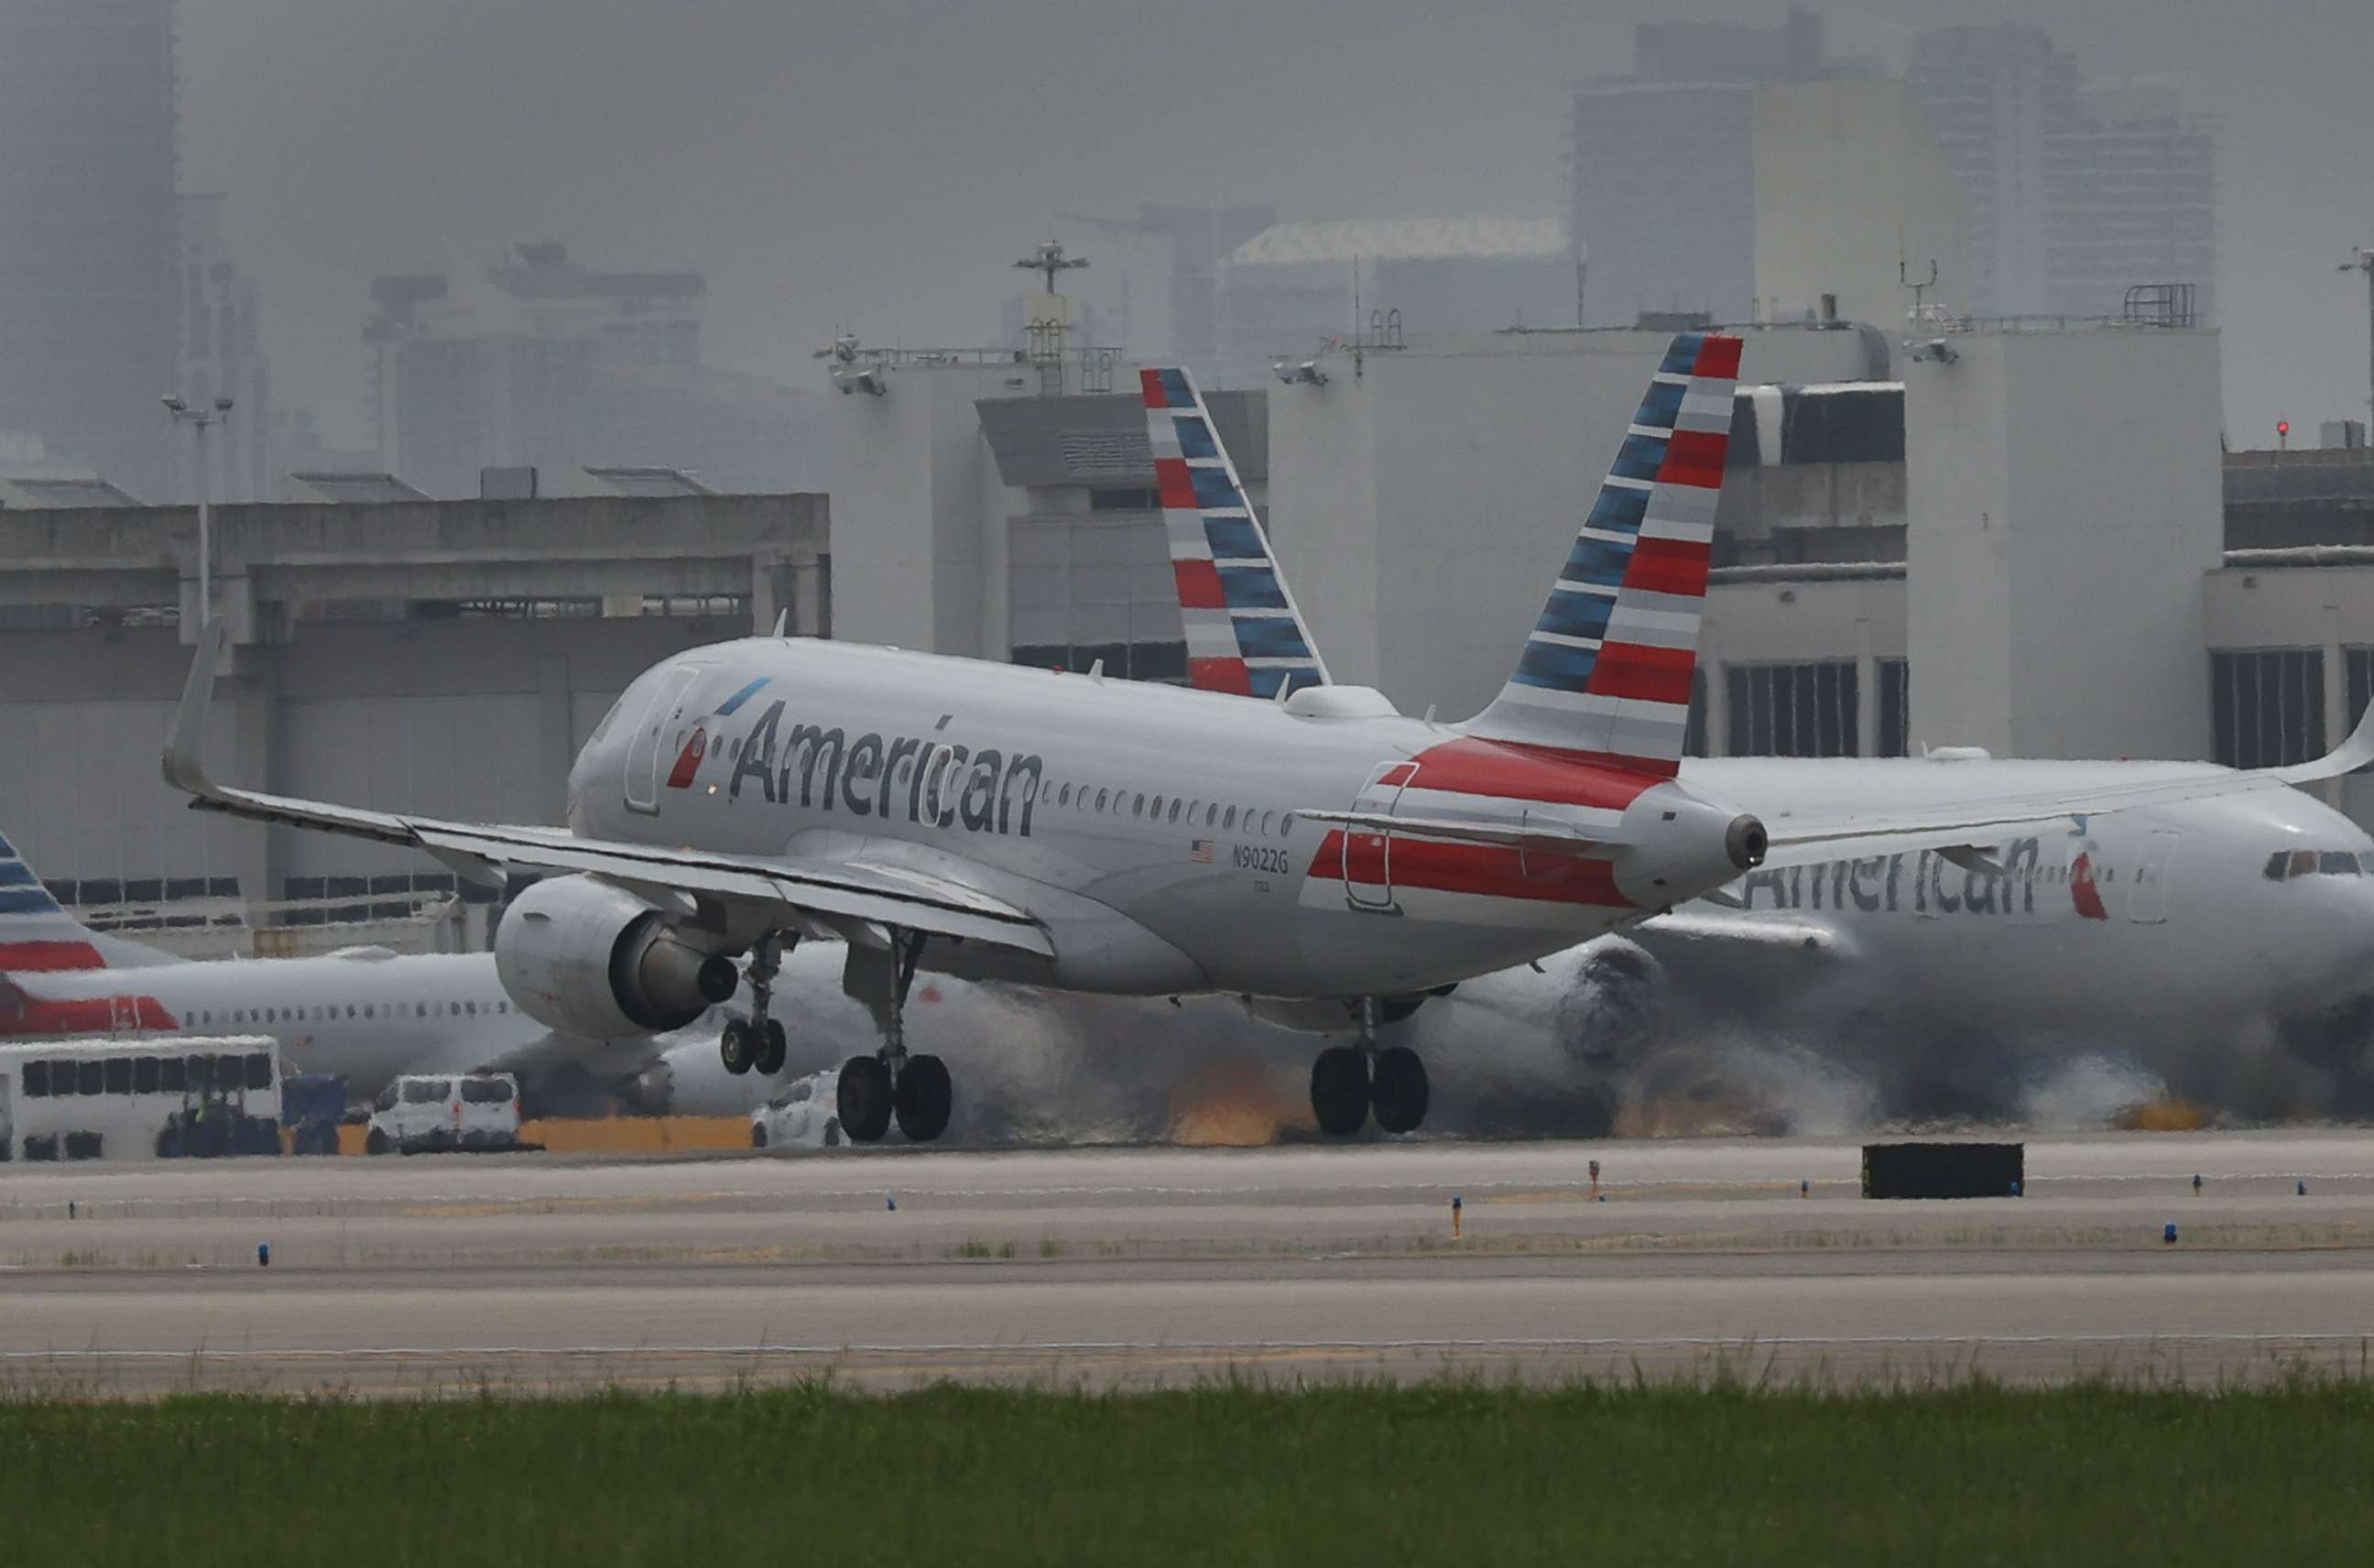 PHOTO: An American Airlines plane takes off at the Miami International Airport on June 16, 2021 in Miami.